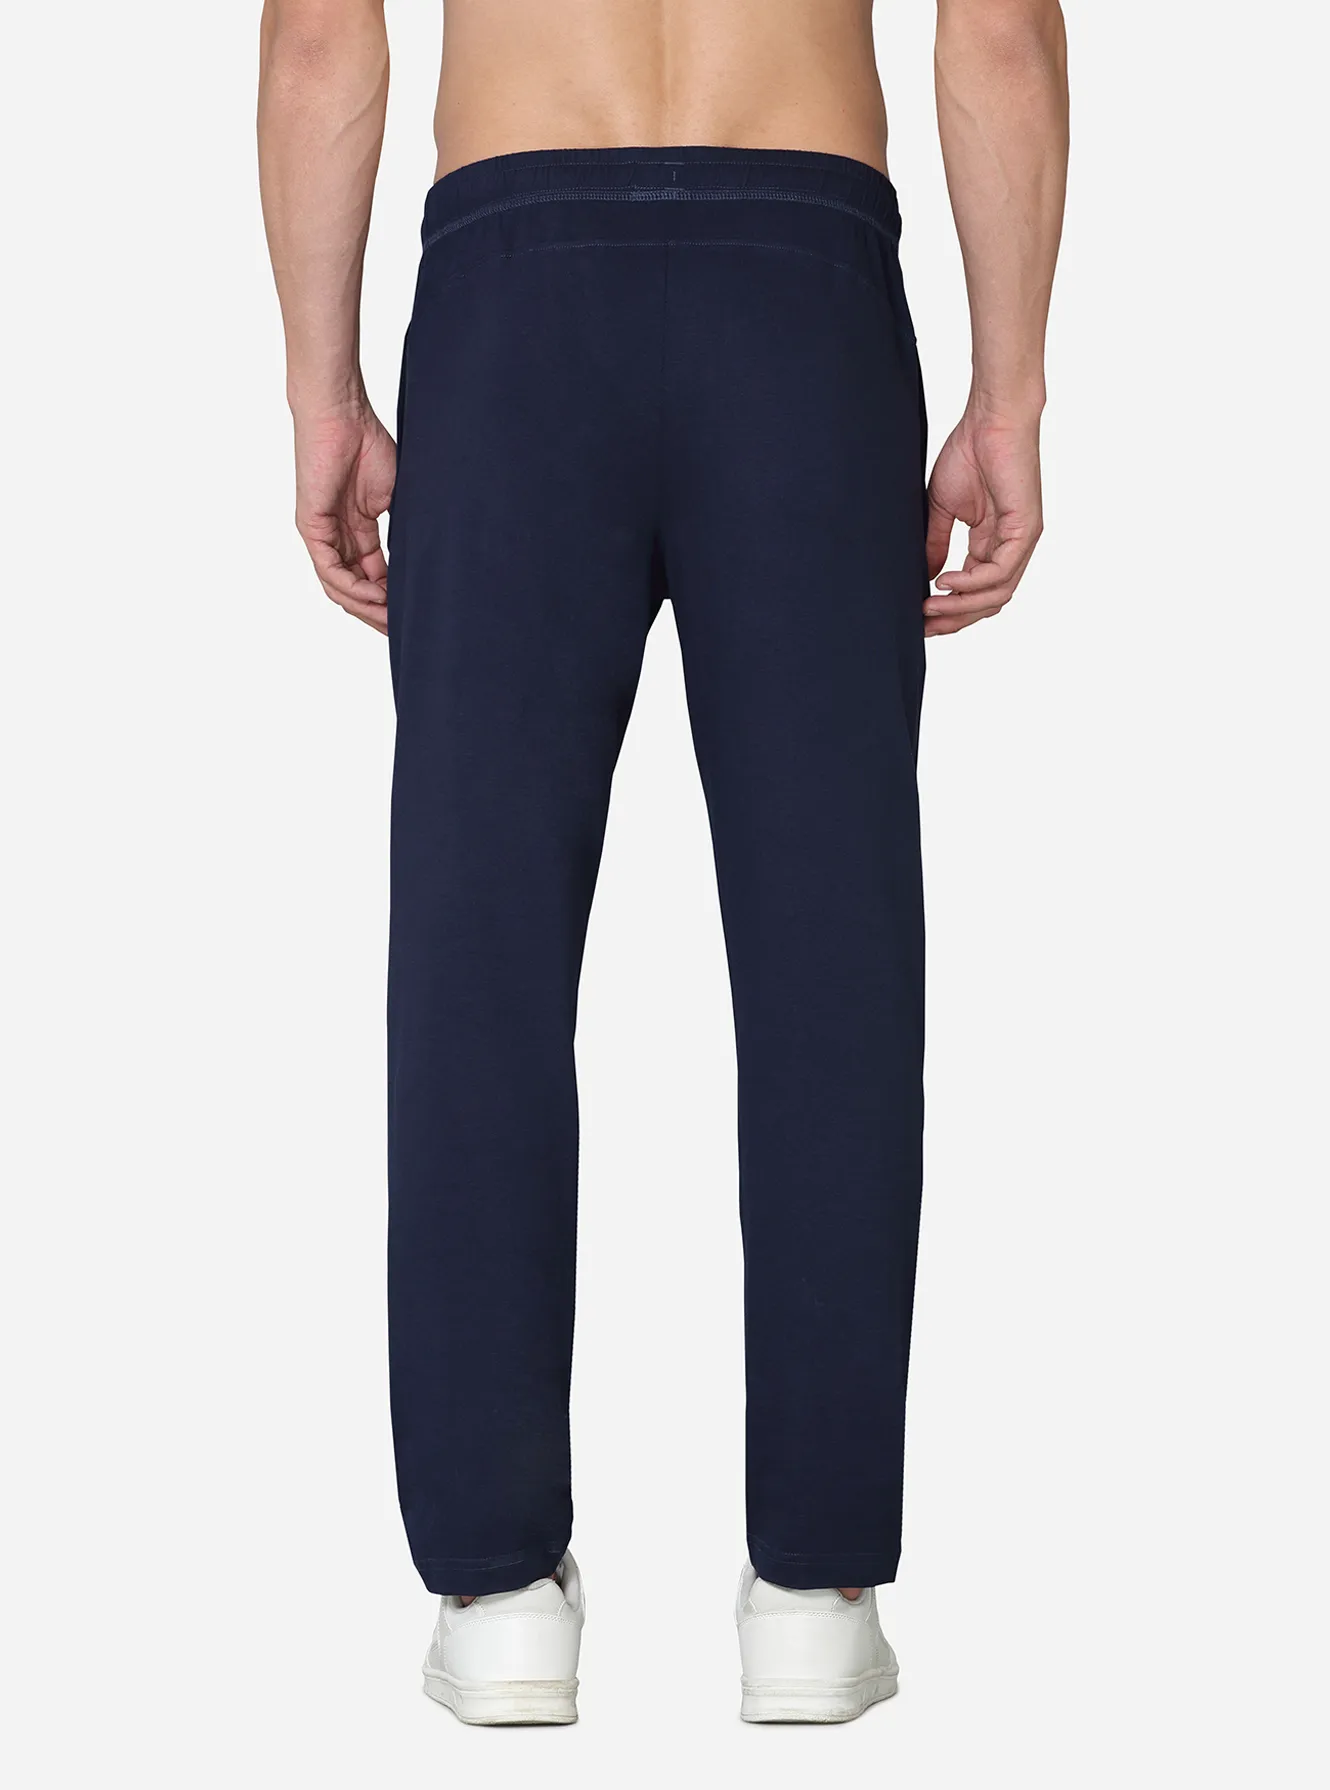 United Colors of Benetton Track Pants With Taping In Blue, $13 | Asos |  Lookastic